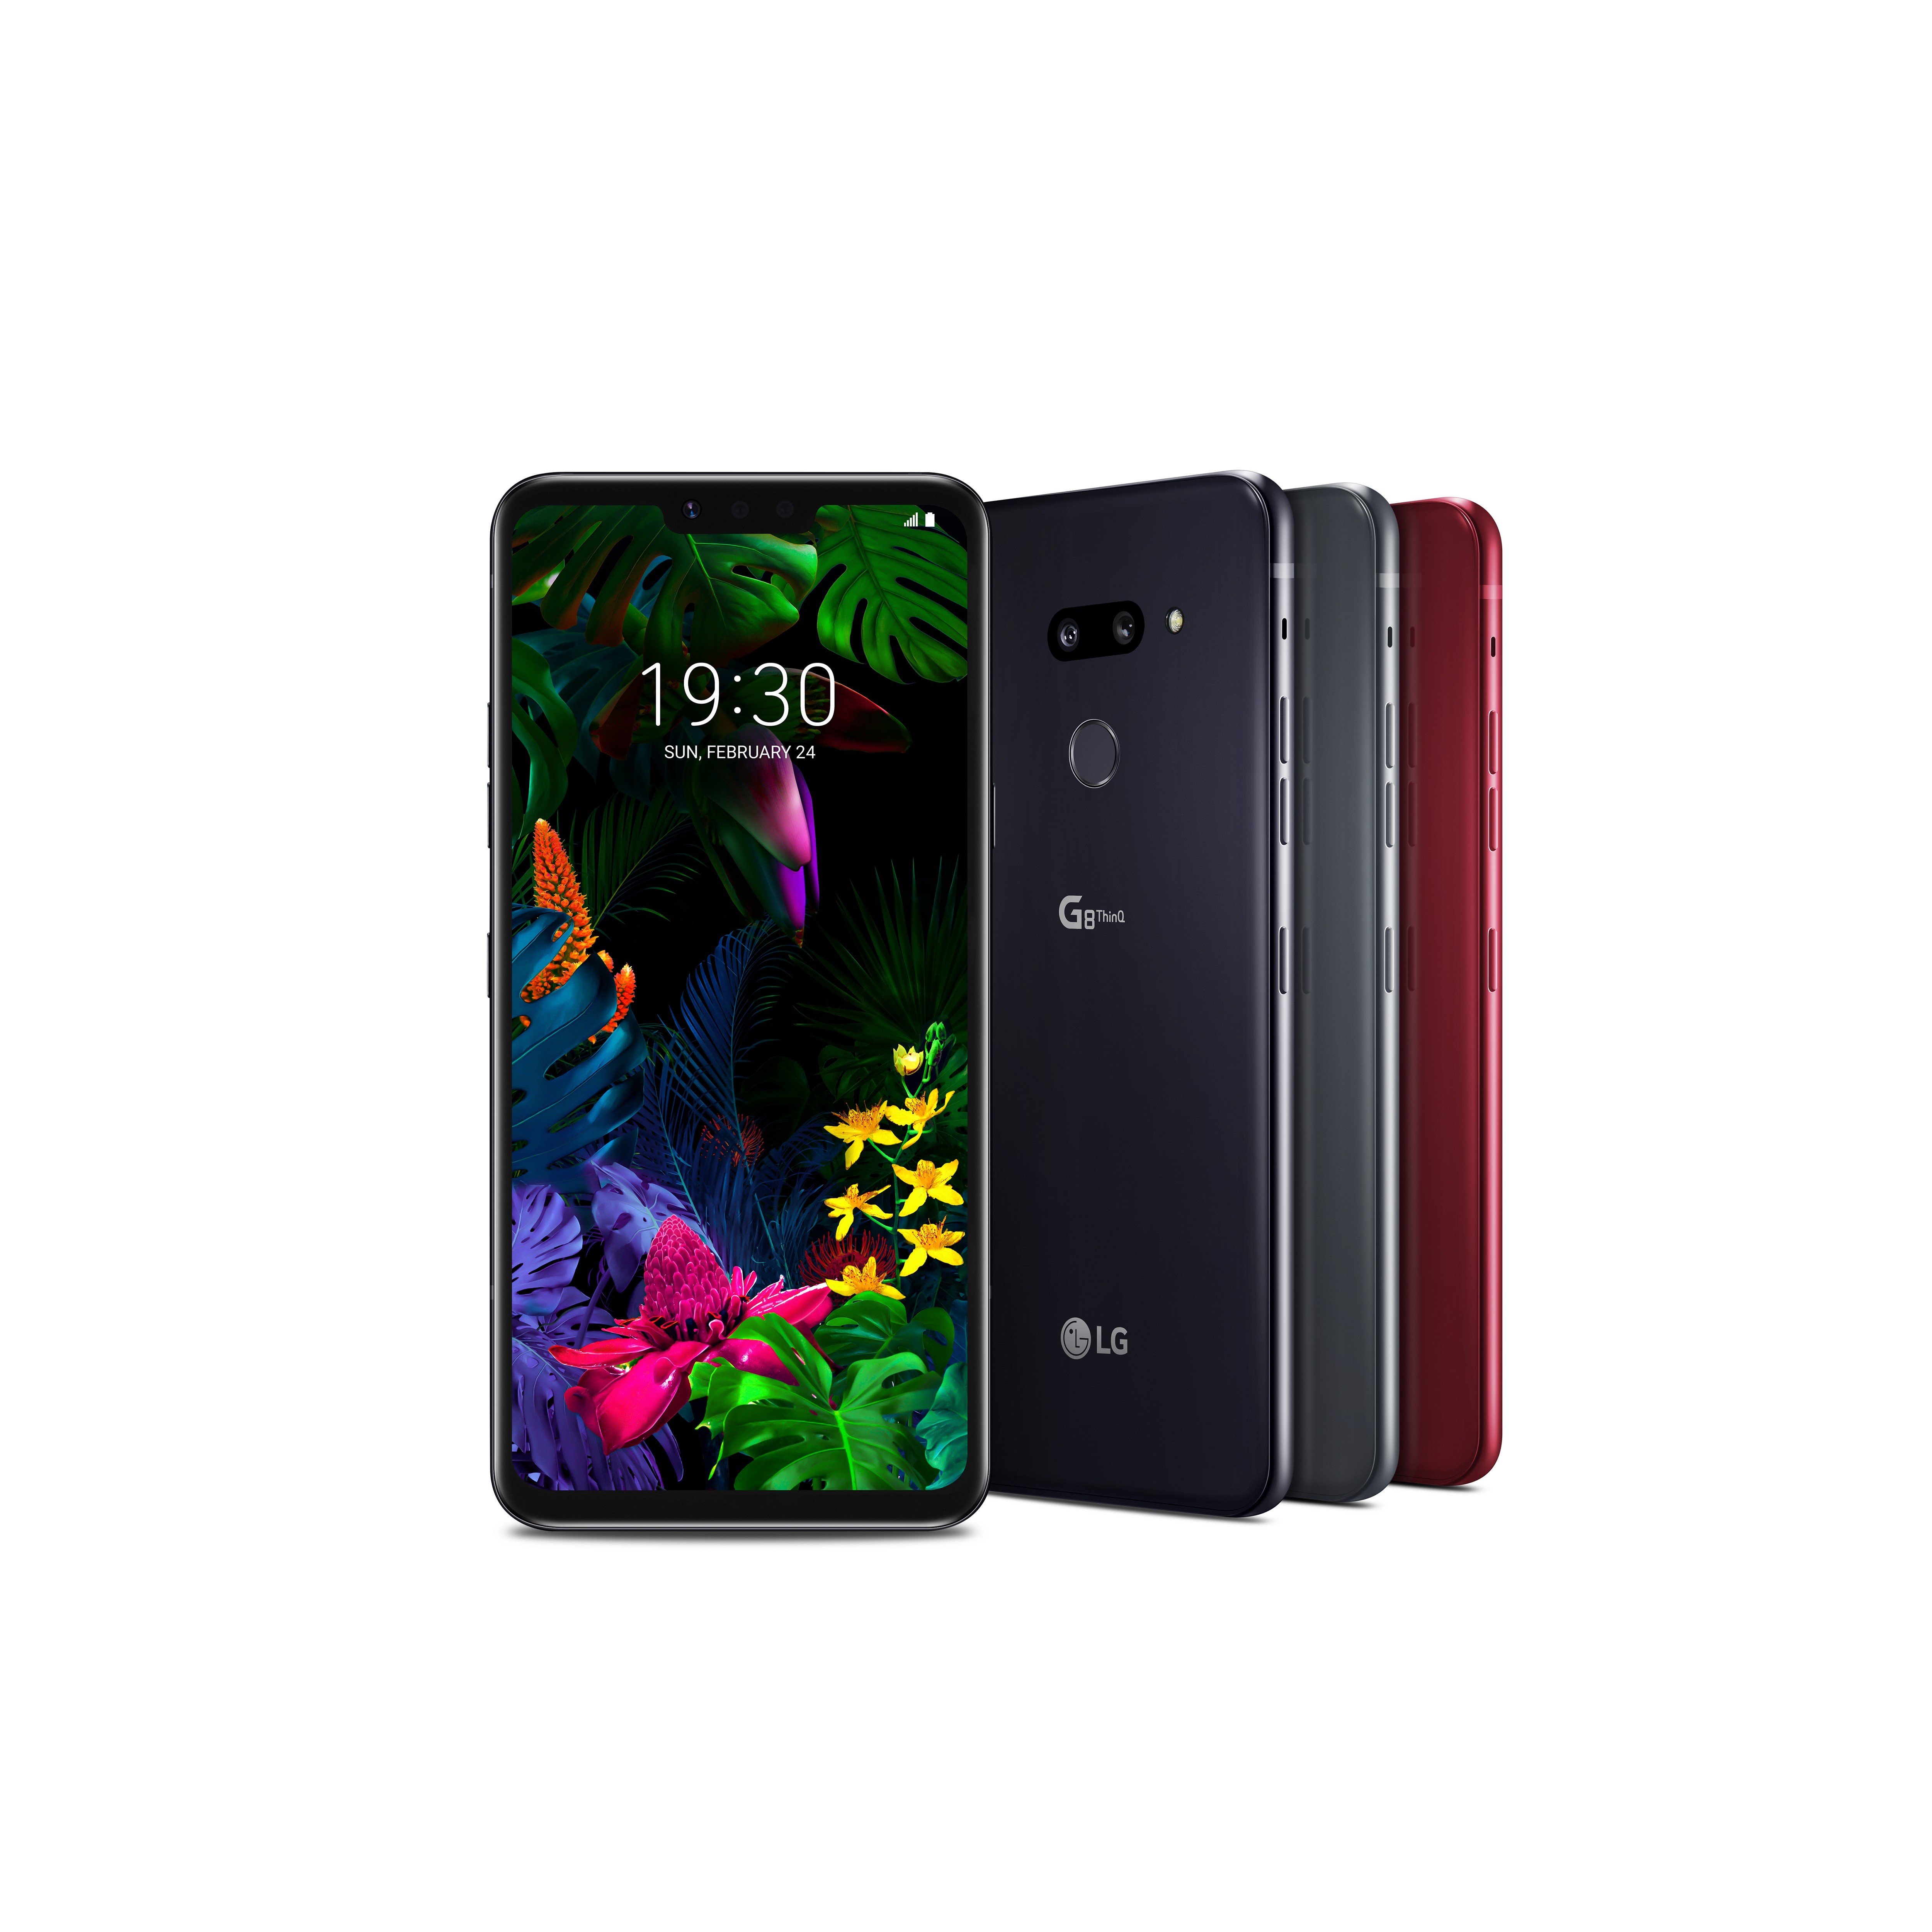 The front and rear view of the LG G8 ThinQ in New Aurora Black, New Platinum Gray and Carmine Red